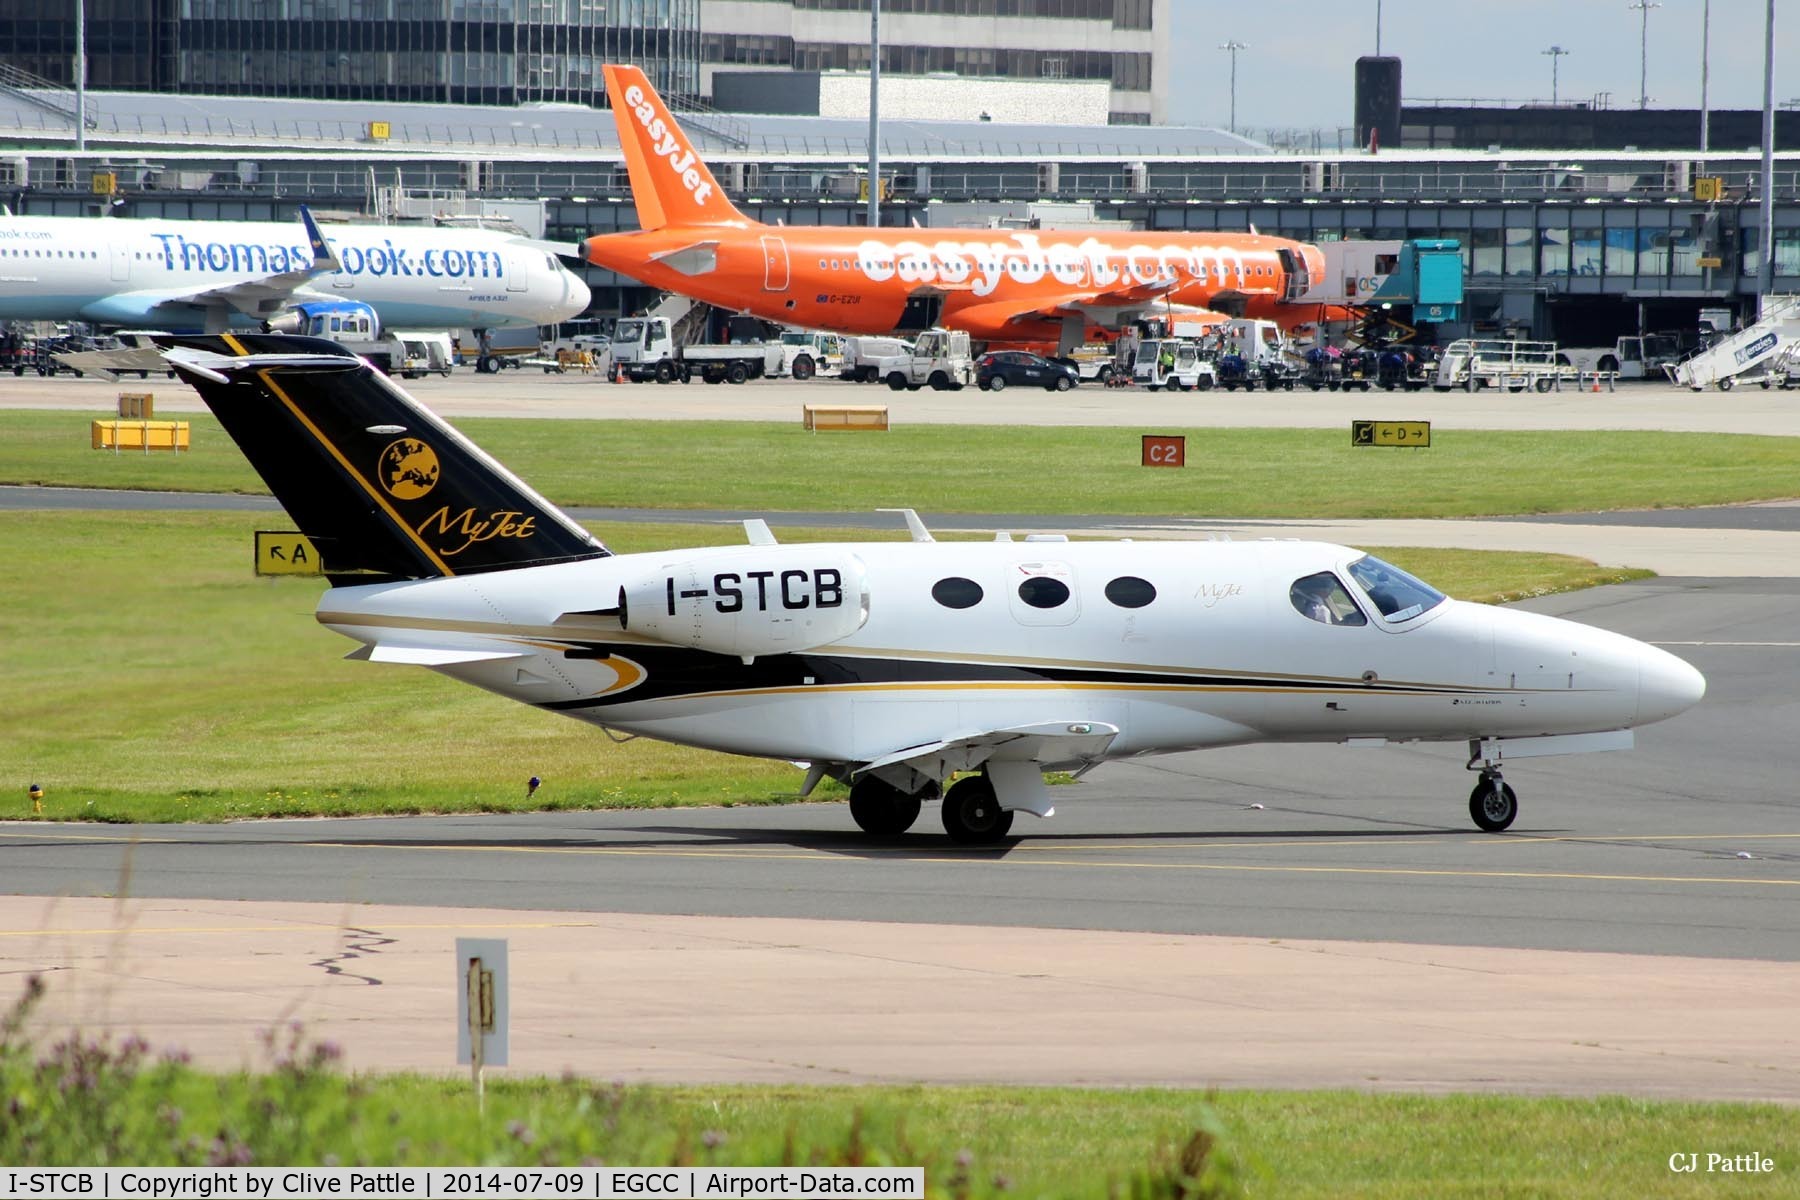 I-STCB, 2010 Cessna 510 Citation Mustang Citation Mustang C/N 510-0330, Manchester taxi for departure